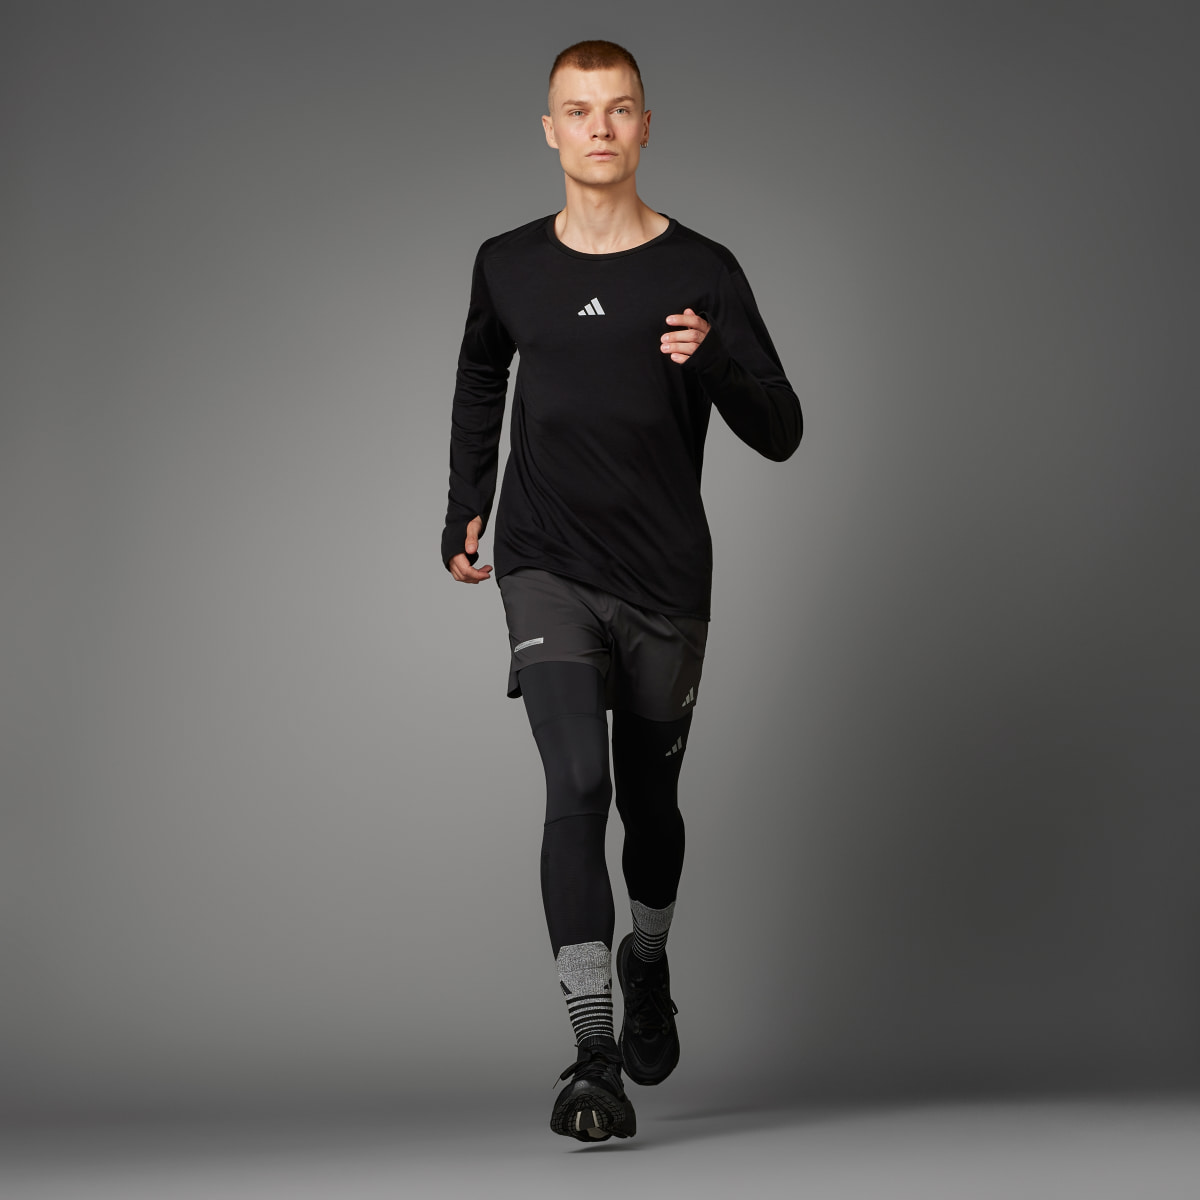 Adidas Ultimate Running Conquer the Elements Merino Long Sleeve Long-sleeve Top. 10